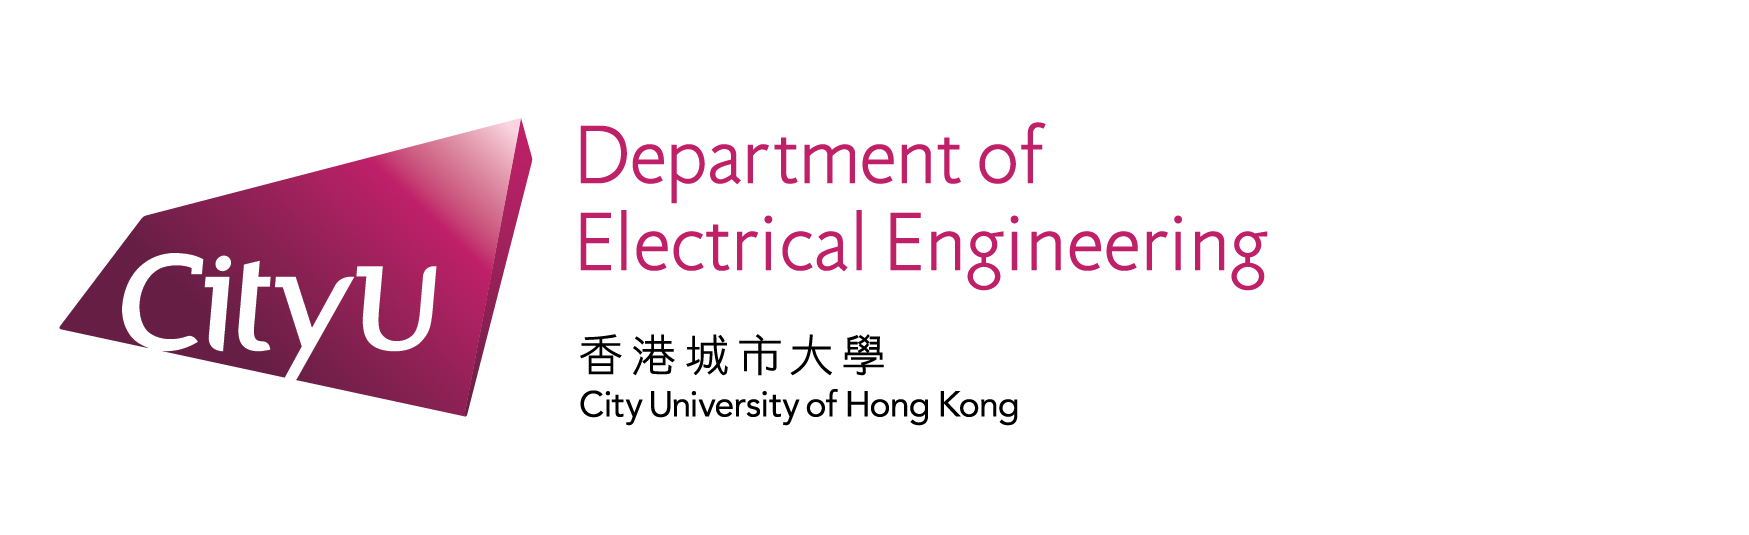 Department of Electrical Engineering, City University of Hong Kong